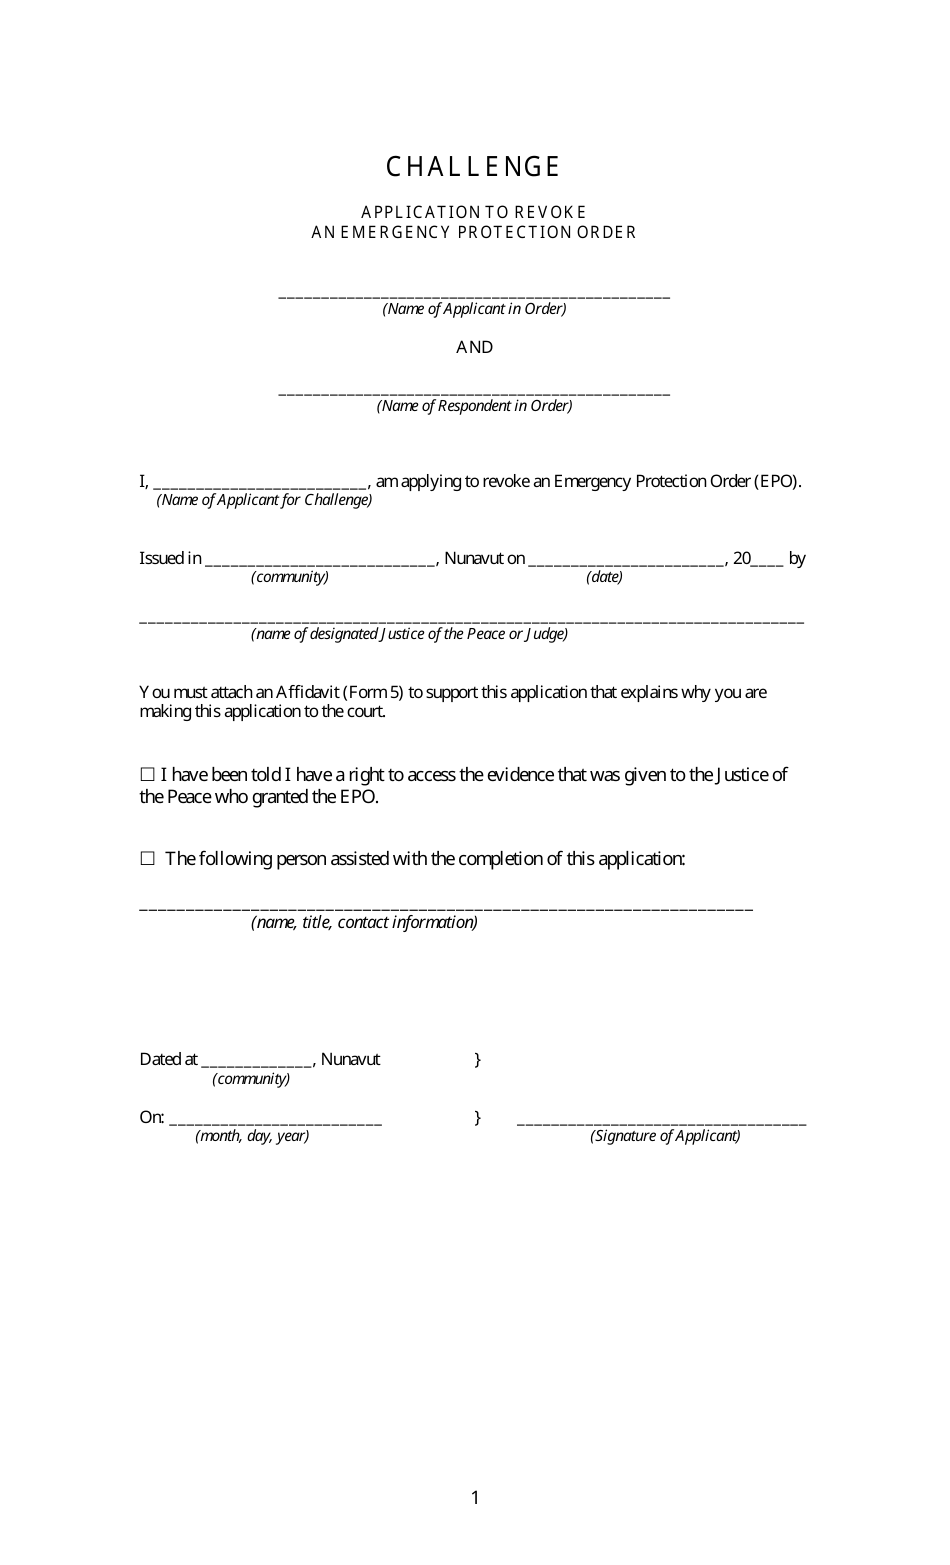 Challenge Application to Revoke an Emergency Protection Order - Nunavut, Canada, Page 1